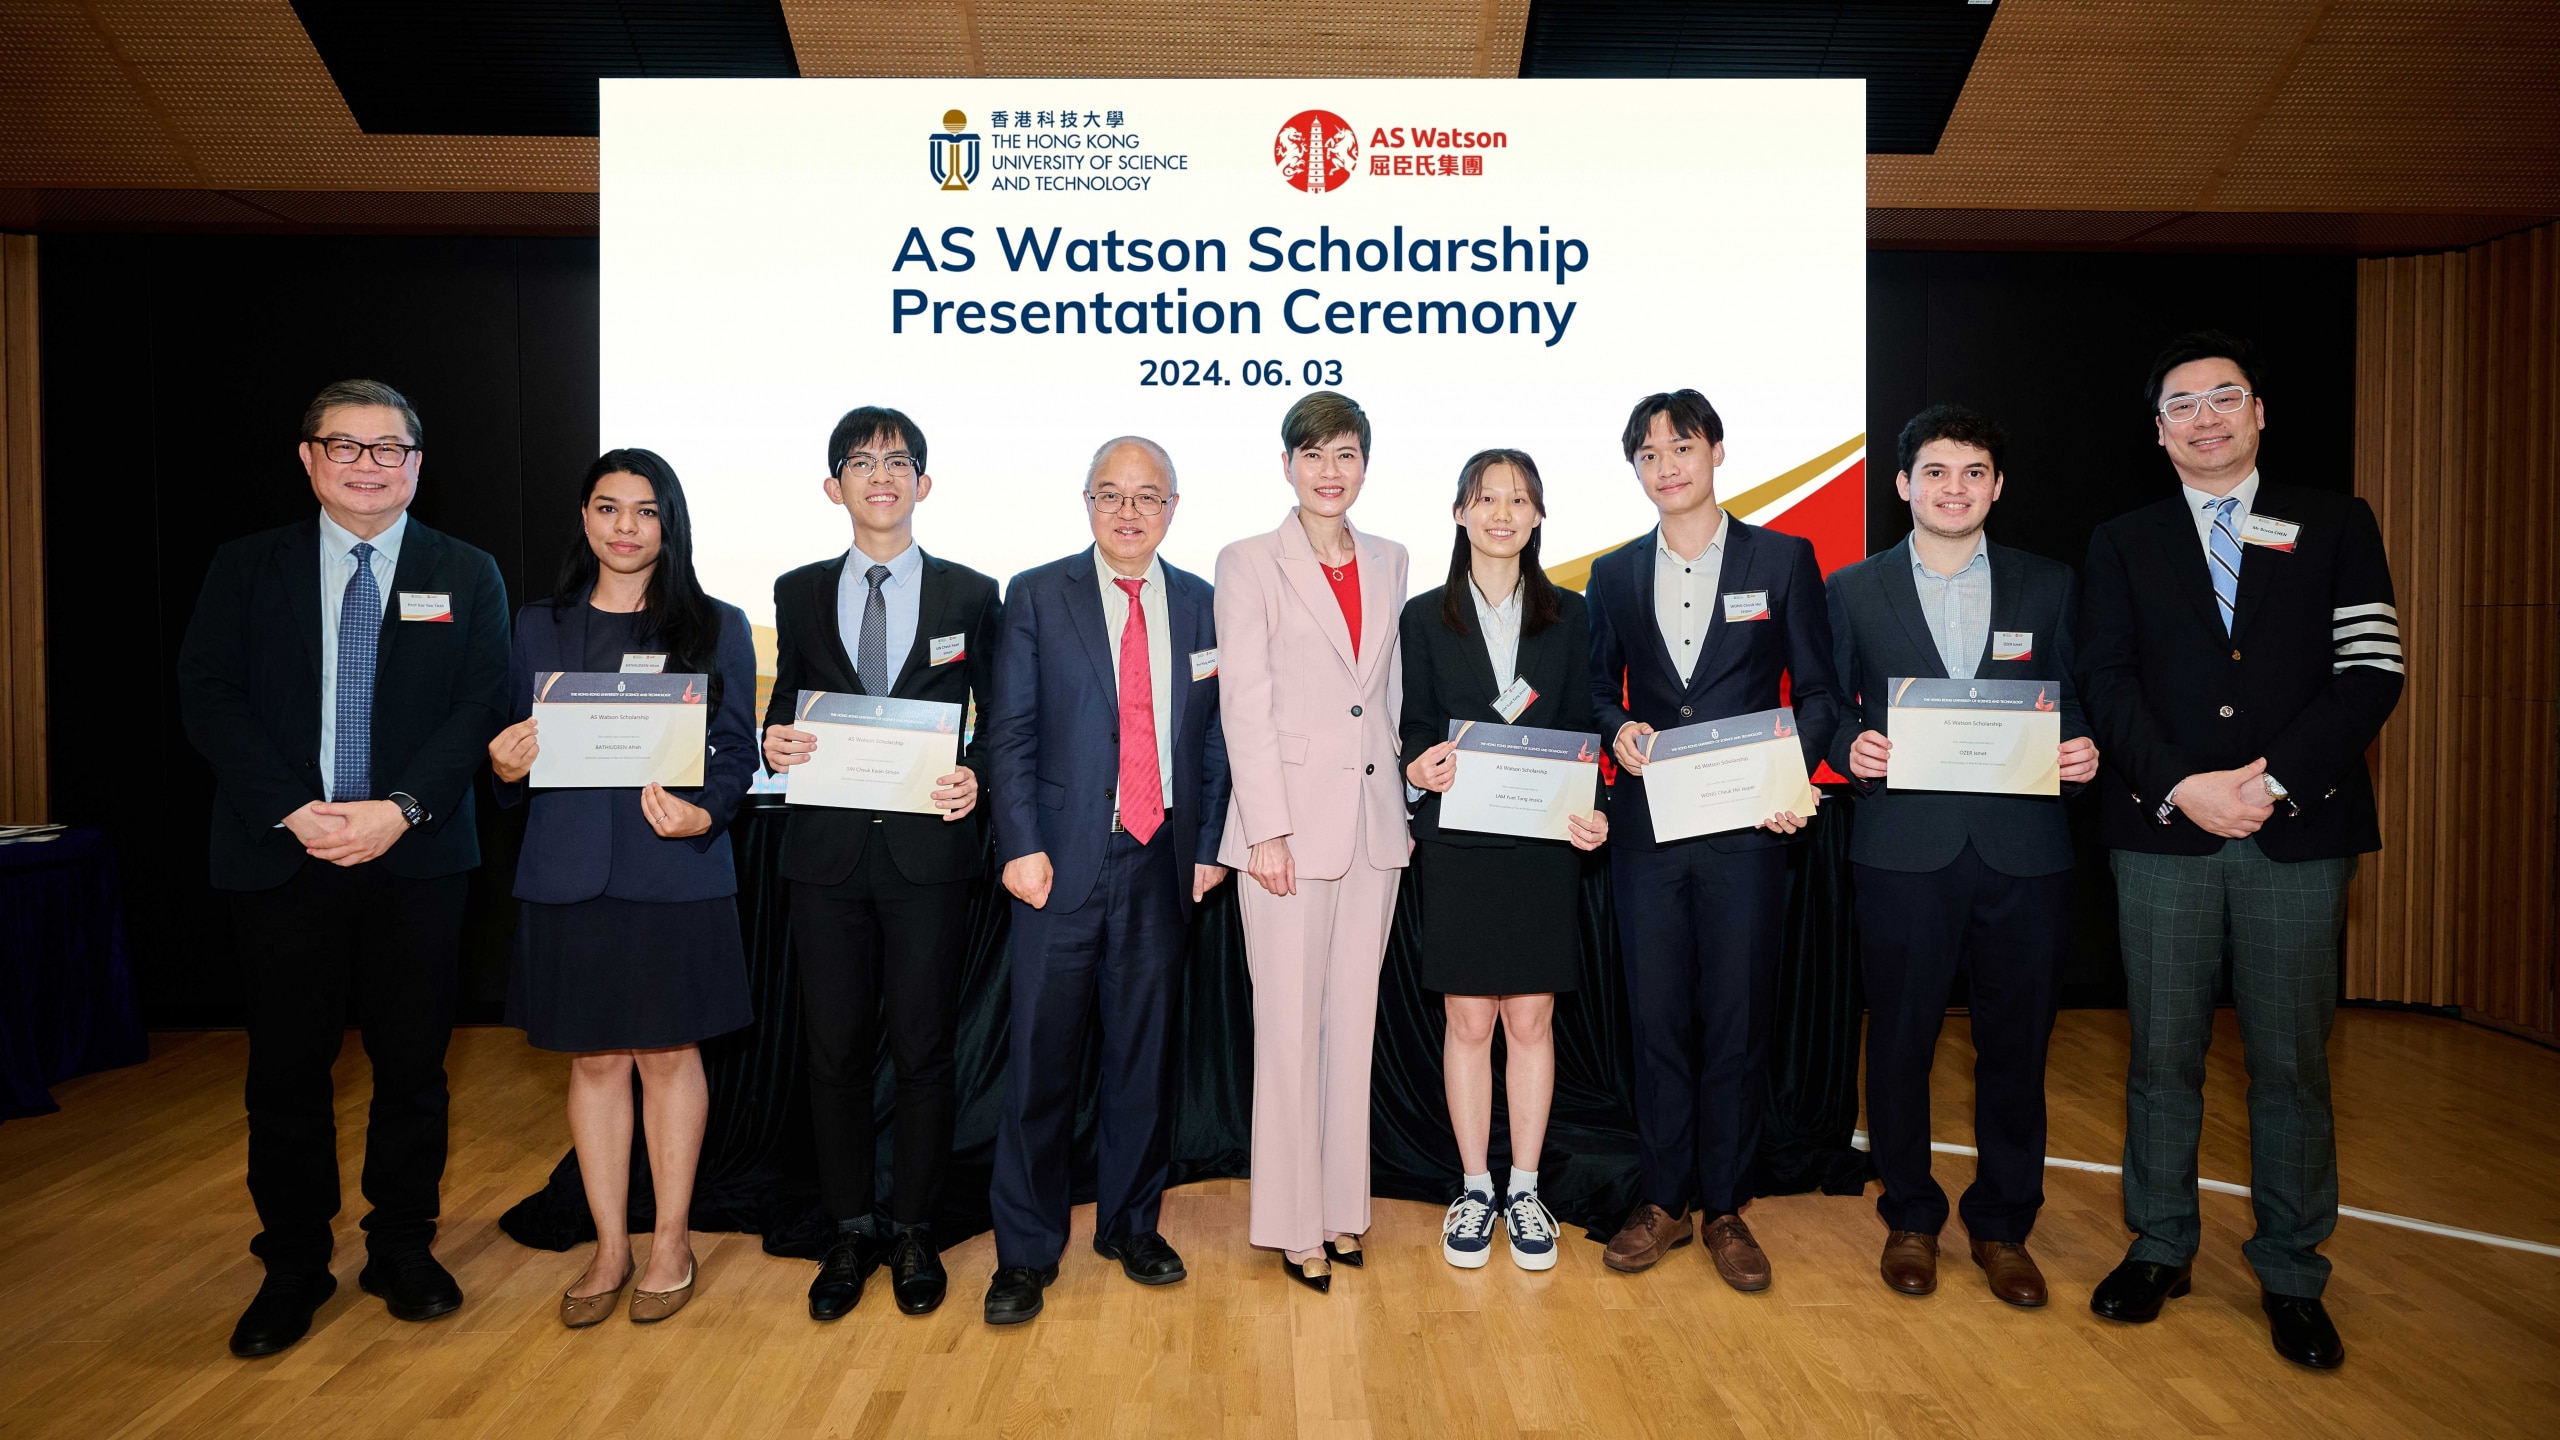 AS Watson Group Announces its First-Ever Collaboration with HKUST and Donates HKD1M to Establish a Scholarship Programme